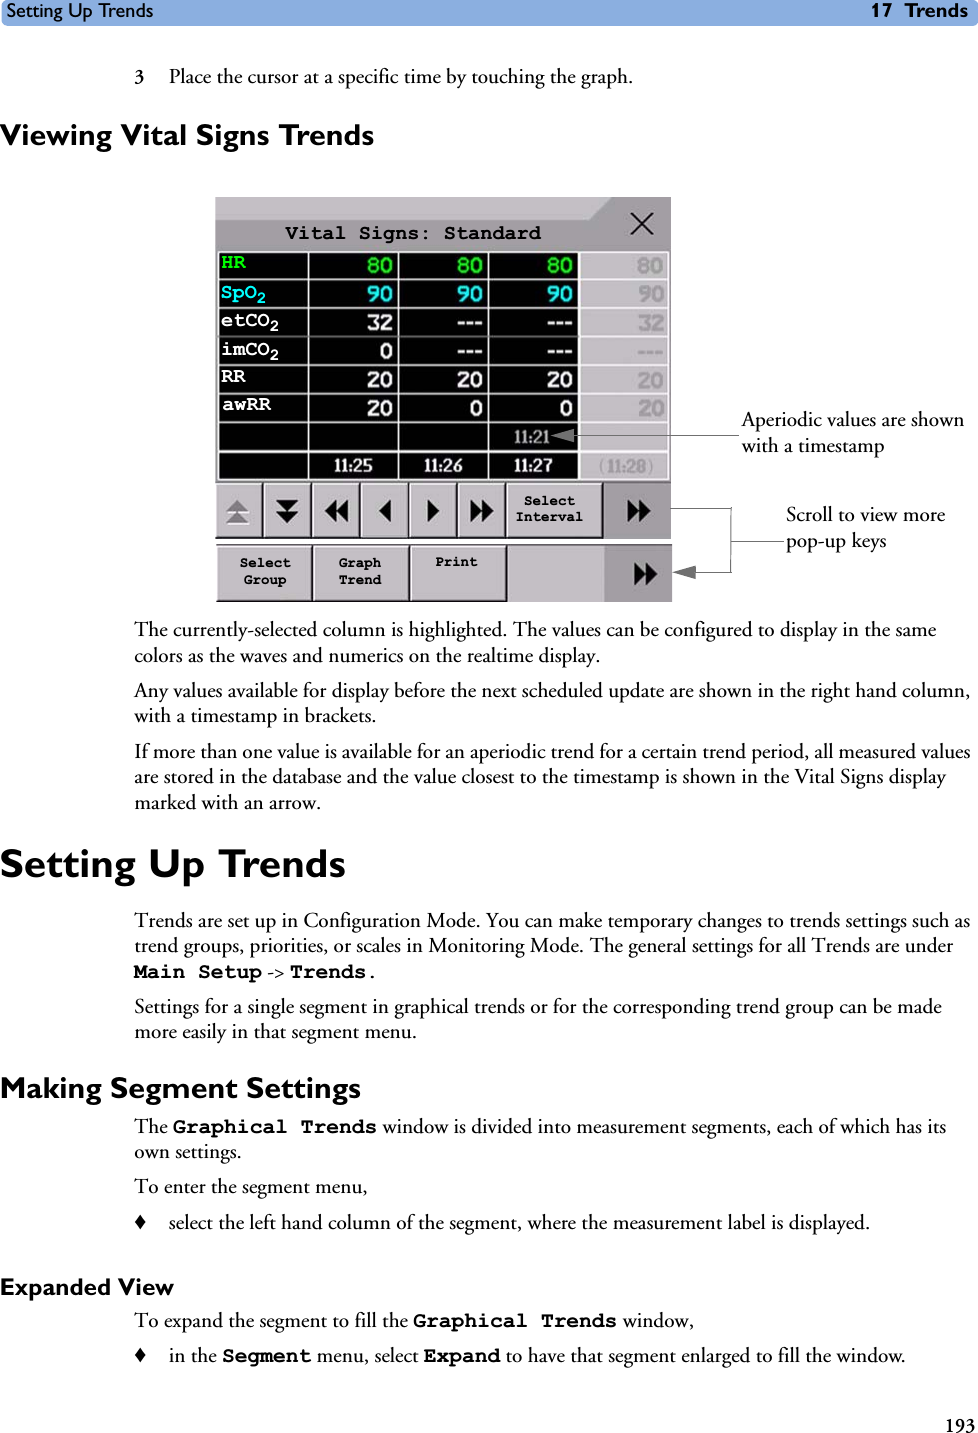 Setting Up Trends 17 Trends1933Place the cursor at a specific time by touching the graph.Viewing Vital Signs TrendsThe currently-selected column is highlighted. The values can be configured to display in the same colors as the waves and numerics on the realtime display.Any values available for display before the next scheduled update are shown in the right hand column, with a timestamp in brackets.If more than one value is available for an aperiodic trend for a certain trend period, all measured values are stored in the database and the value closest to the timestamp is shown in the Vital Signs display marked with an arrow. Setting Up TrendsTrends are set up in Configuration Mode. You can make temporary changes to trends settings such as trend groups, priorities, or scales in Monitoring Mode. The general settings for all Trends are under Main Setup -&gt; Trends. Settings for a single segment in graphical trends or for the corresponding trend group can be made more easily in that segment menu.Making Segment SettingsThe Graphical Trends window is divided into measurement segments, each of which has its own settings.To enter the segment menu,♦select the left hand column of the segment, where the measurement label is displayed.Expanded ViewTo expand the segment to fill the Graphical Trends window, ♦in the Segment menu, select Expand to have that segment enlarged to fill the window.Vital Signs: StandardHRSpO2etCO2Aperiodic values are shown with a timestampimCO2RRawRRSelect GroupGraph TrendPrintSelect Interval Scroll to view more pop-up keys